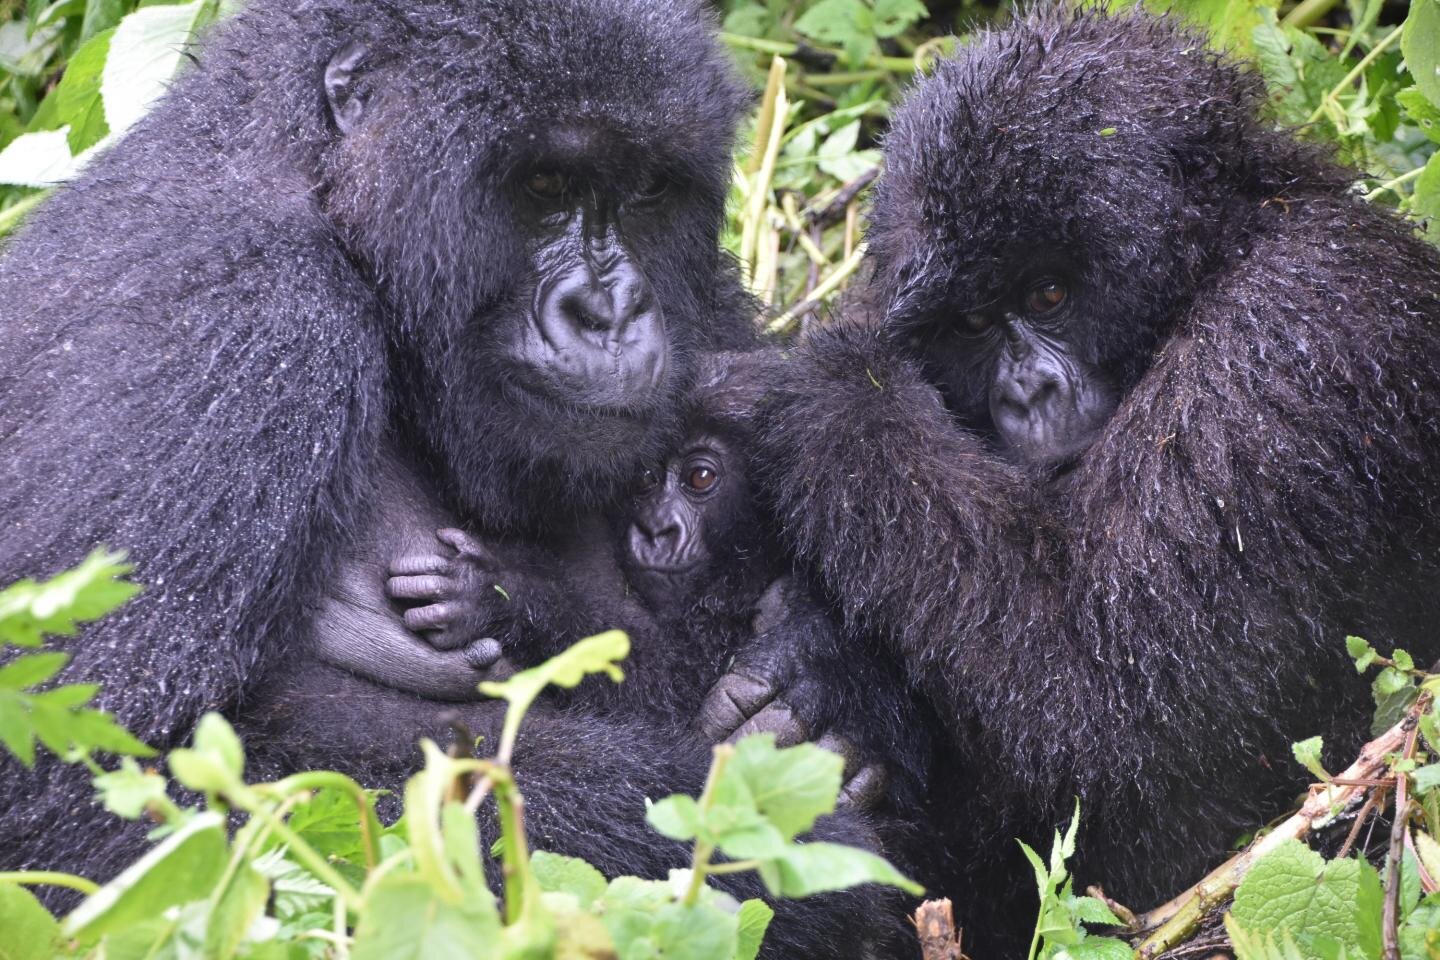 Conservation success leads to new challenges for endangered mountain gorillas